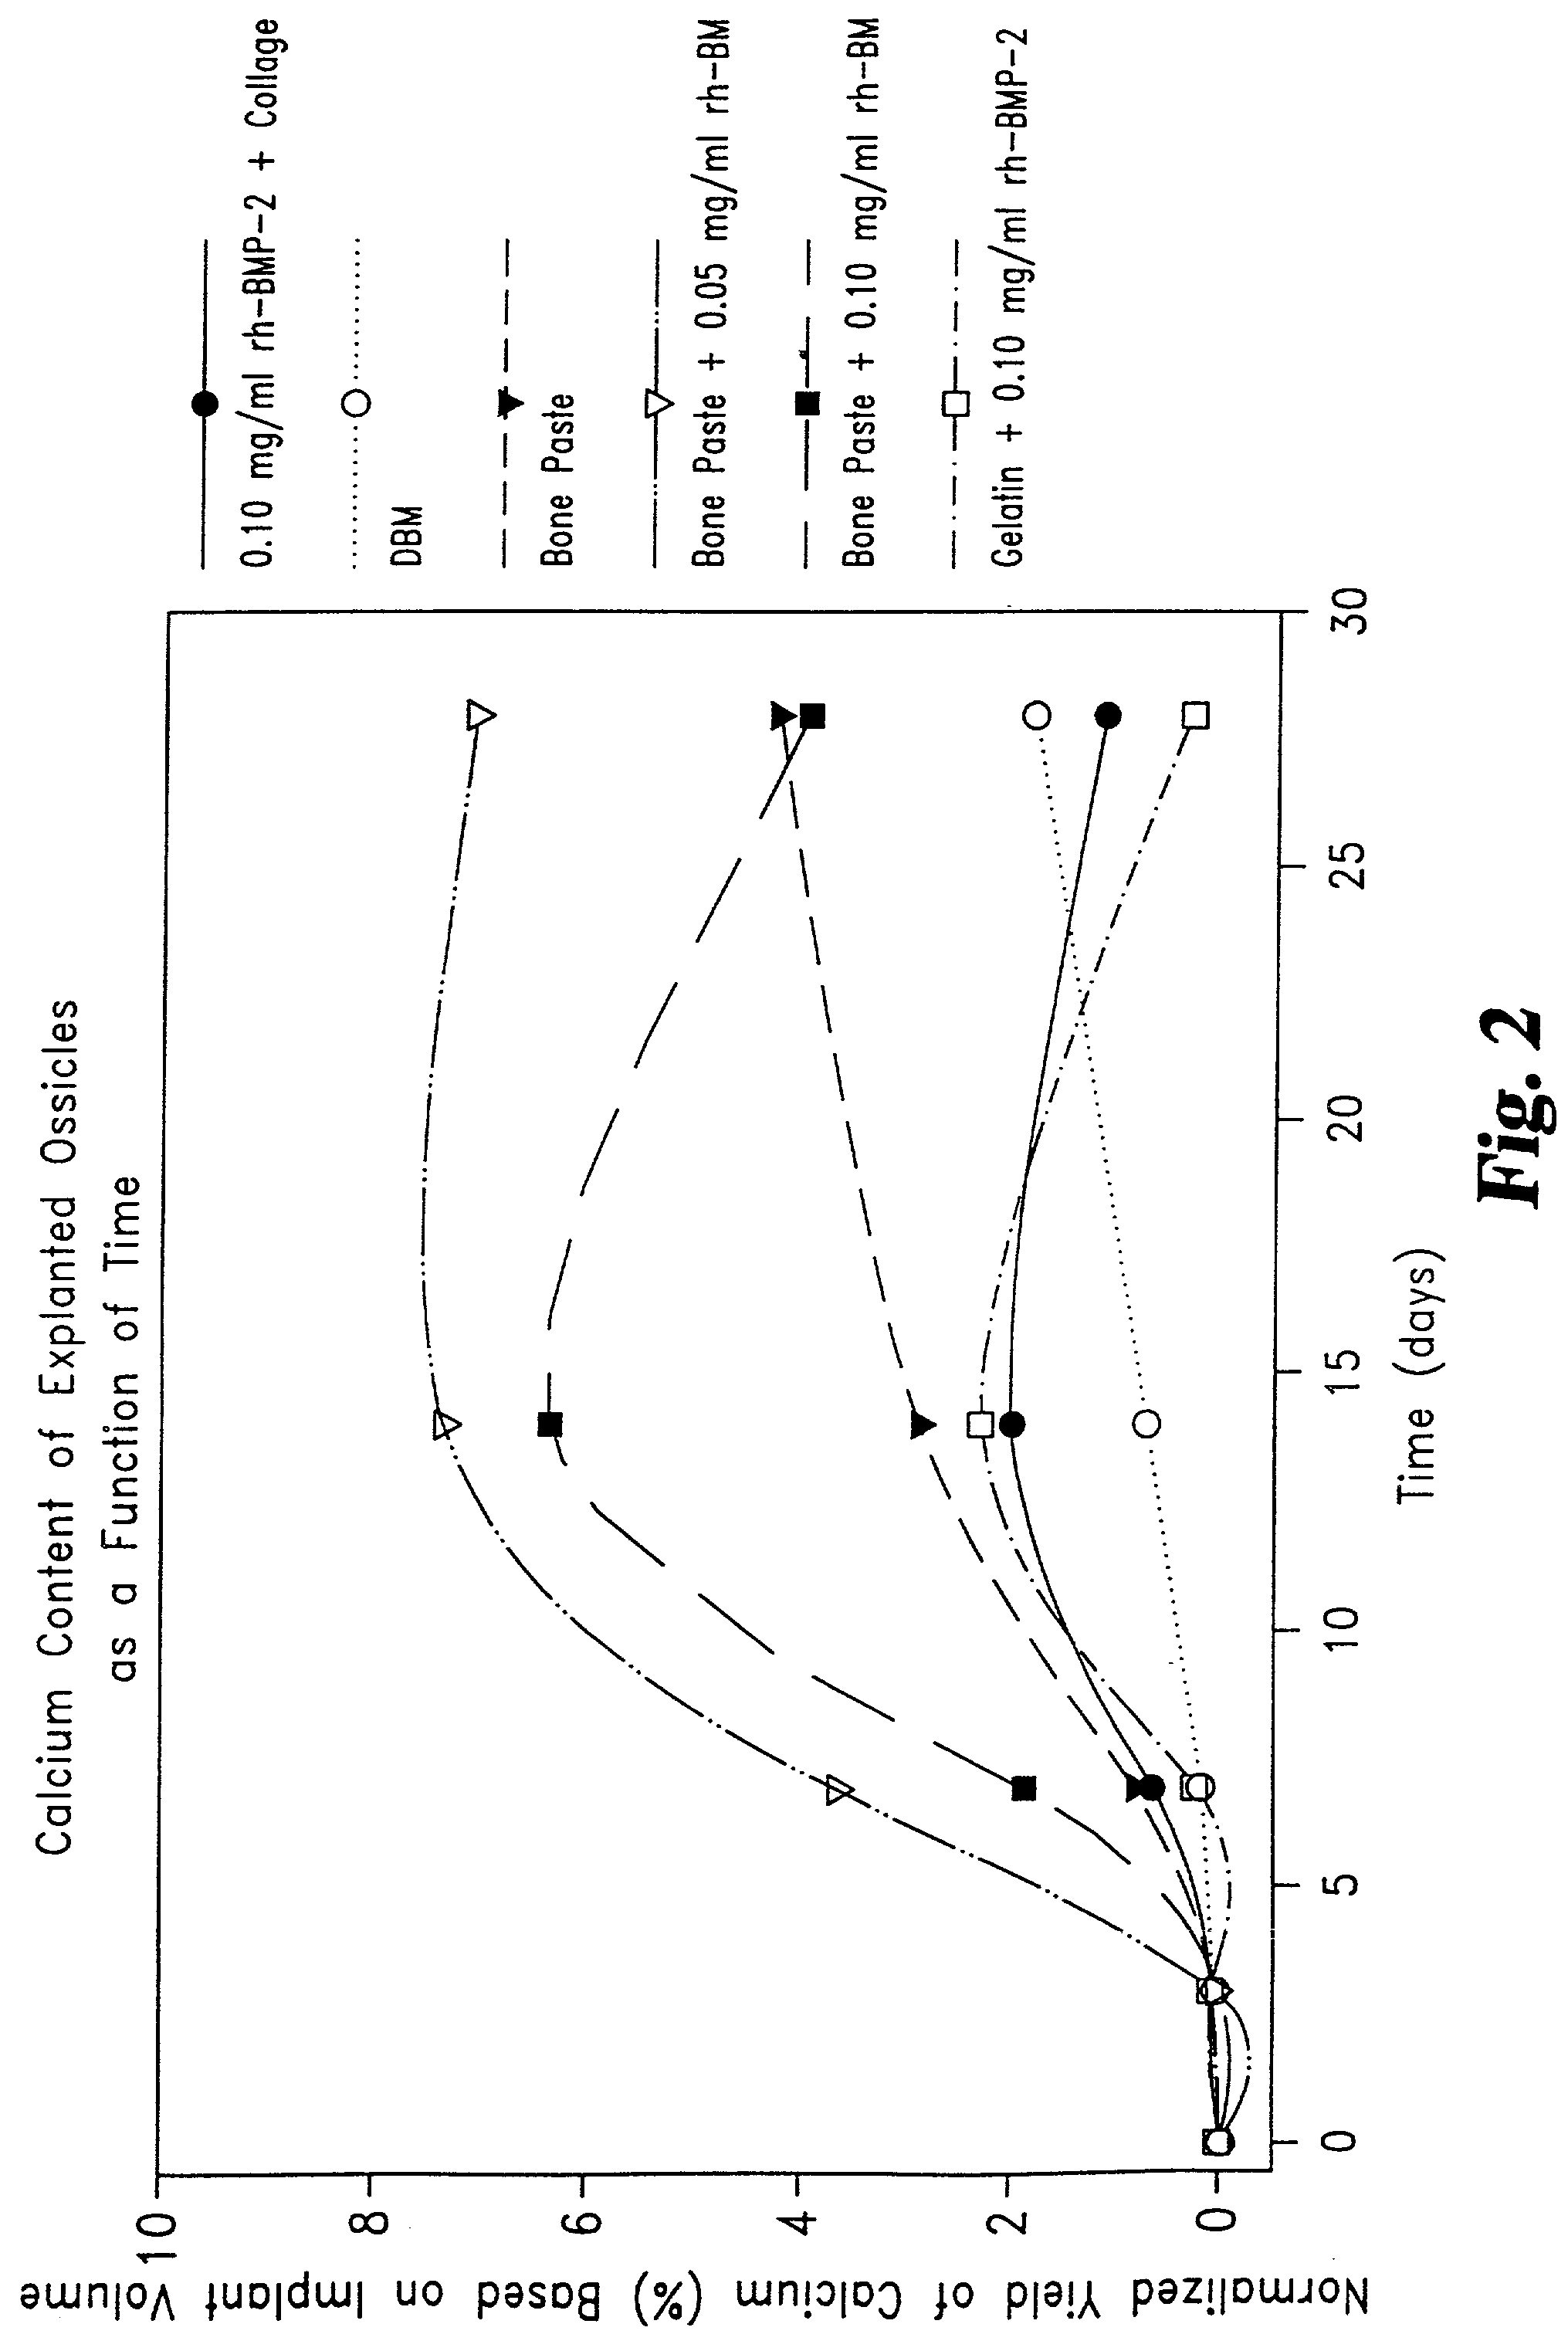 Osteogenic paste compositions and uses thereof